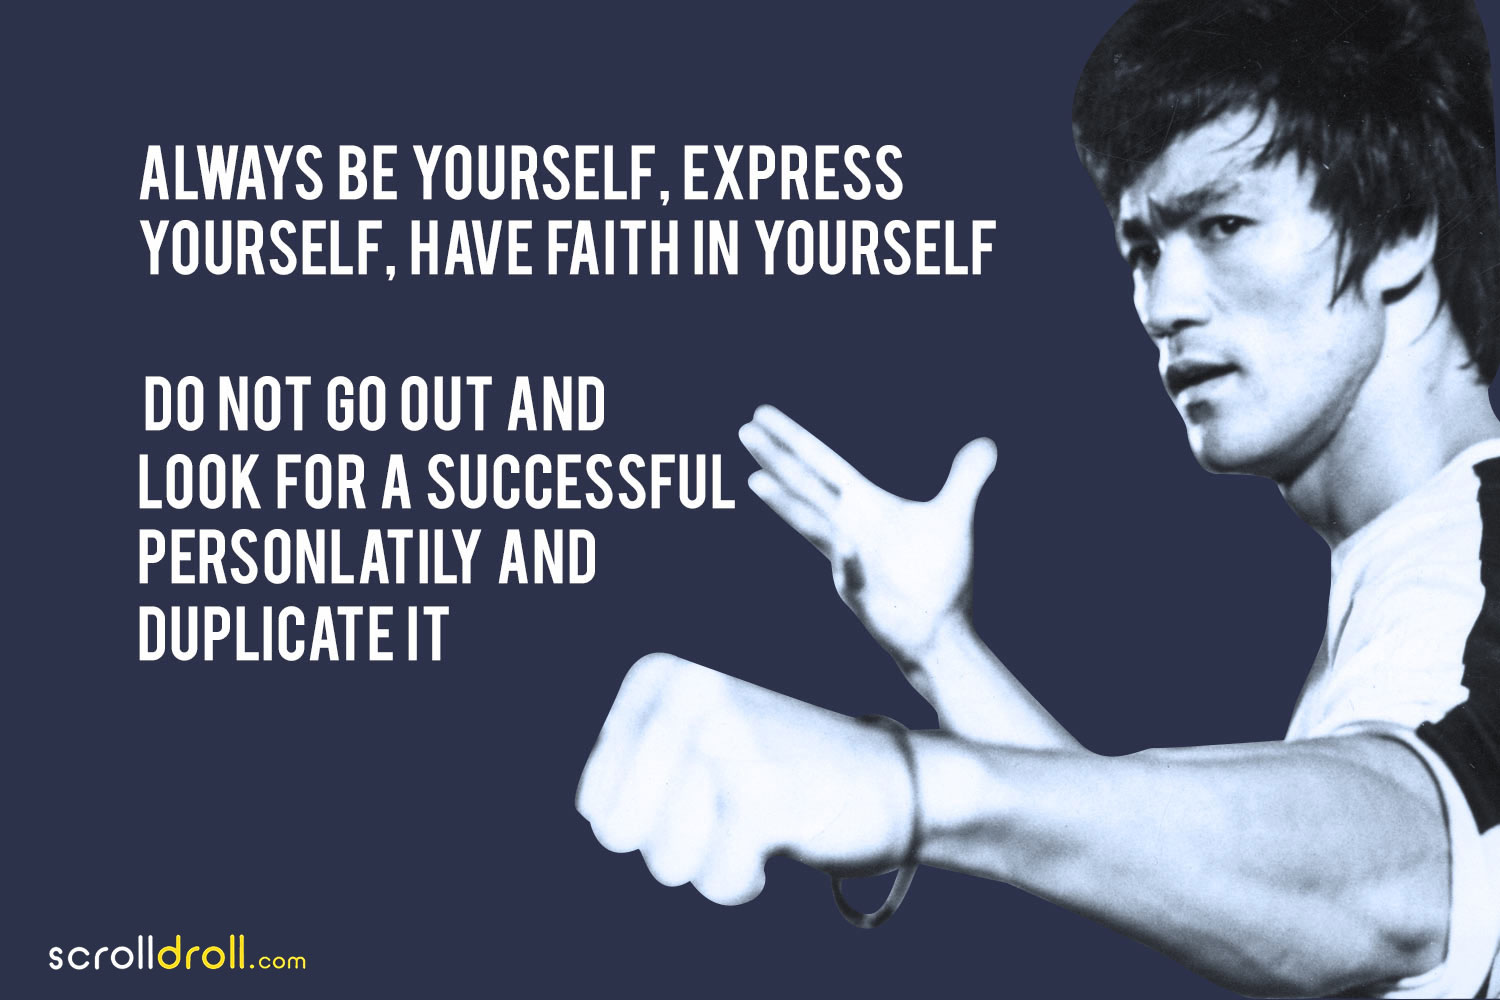 bruce lee quotes 11 - The Best of Indian Pop Culture & What's ...